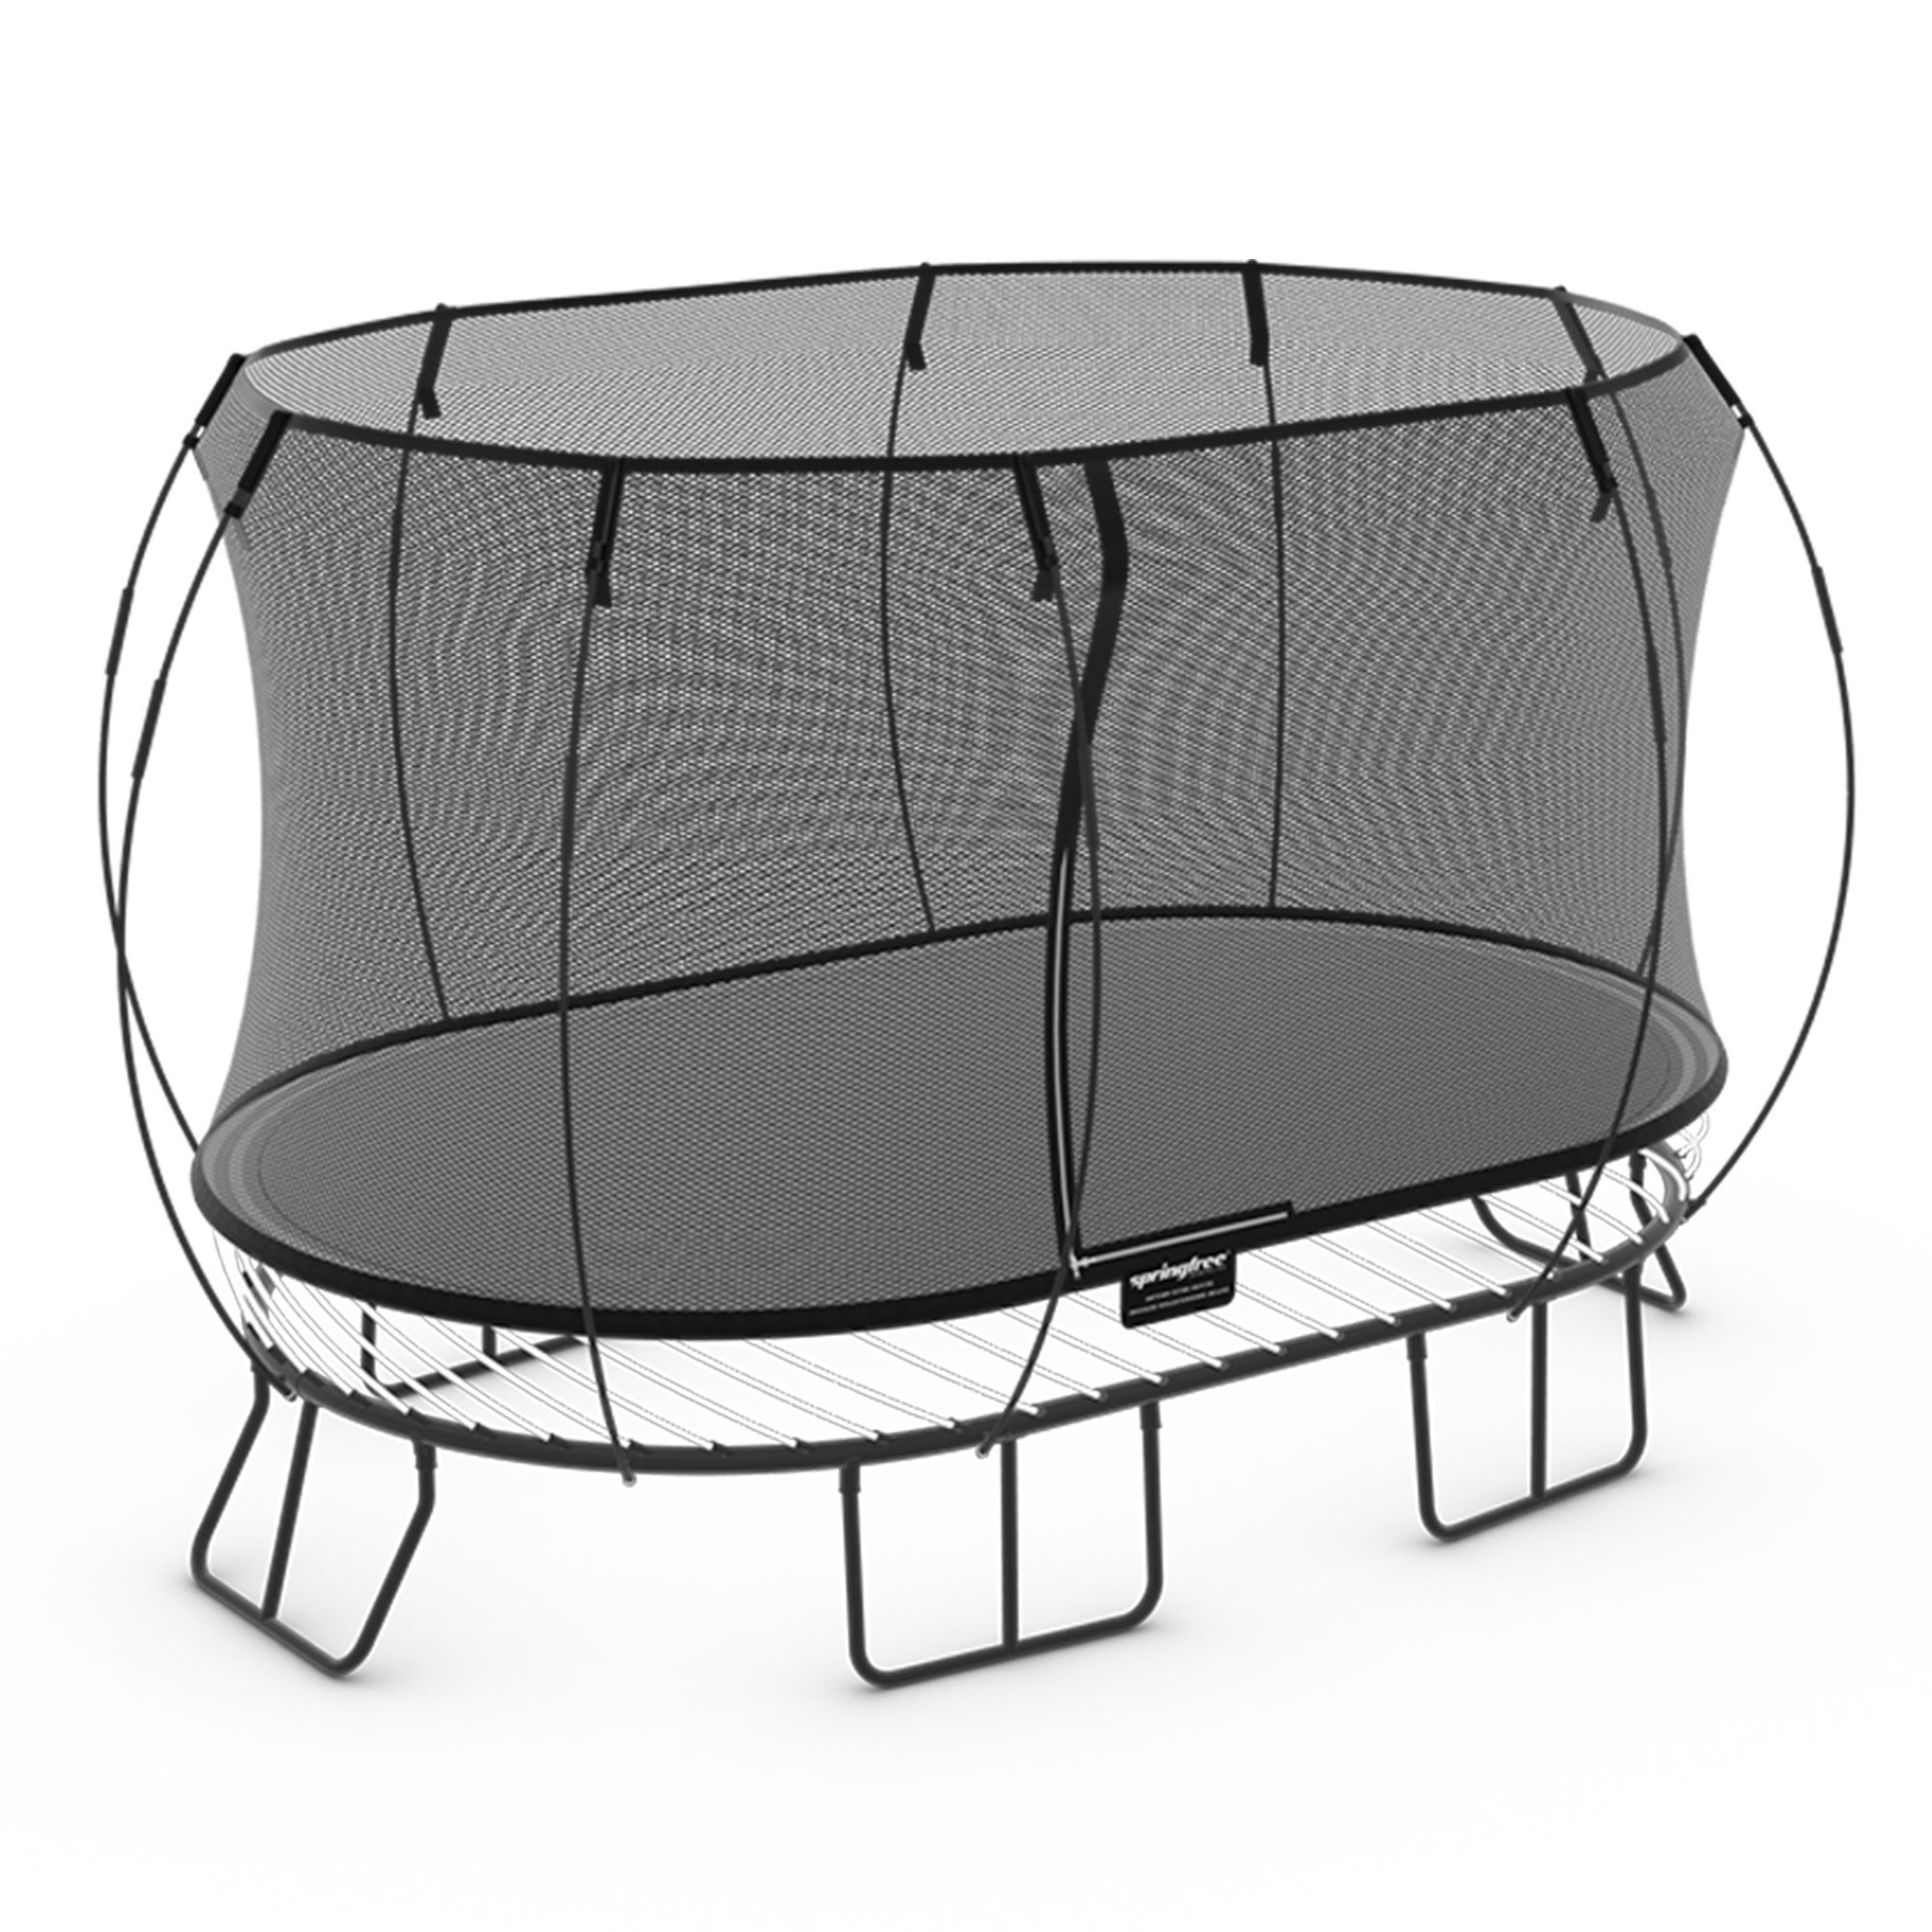 Springfree Outdoor Compact Oval Kids Trampoline for Outdoor Use, Black - image 1 of 9